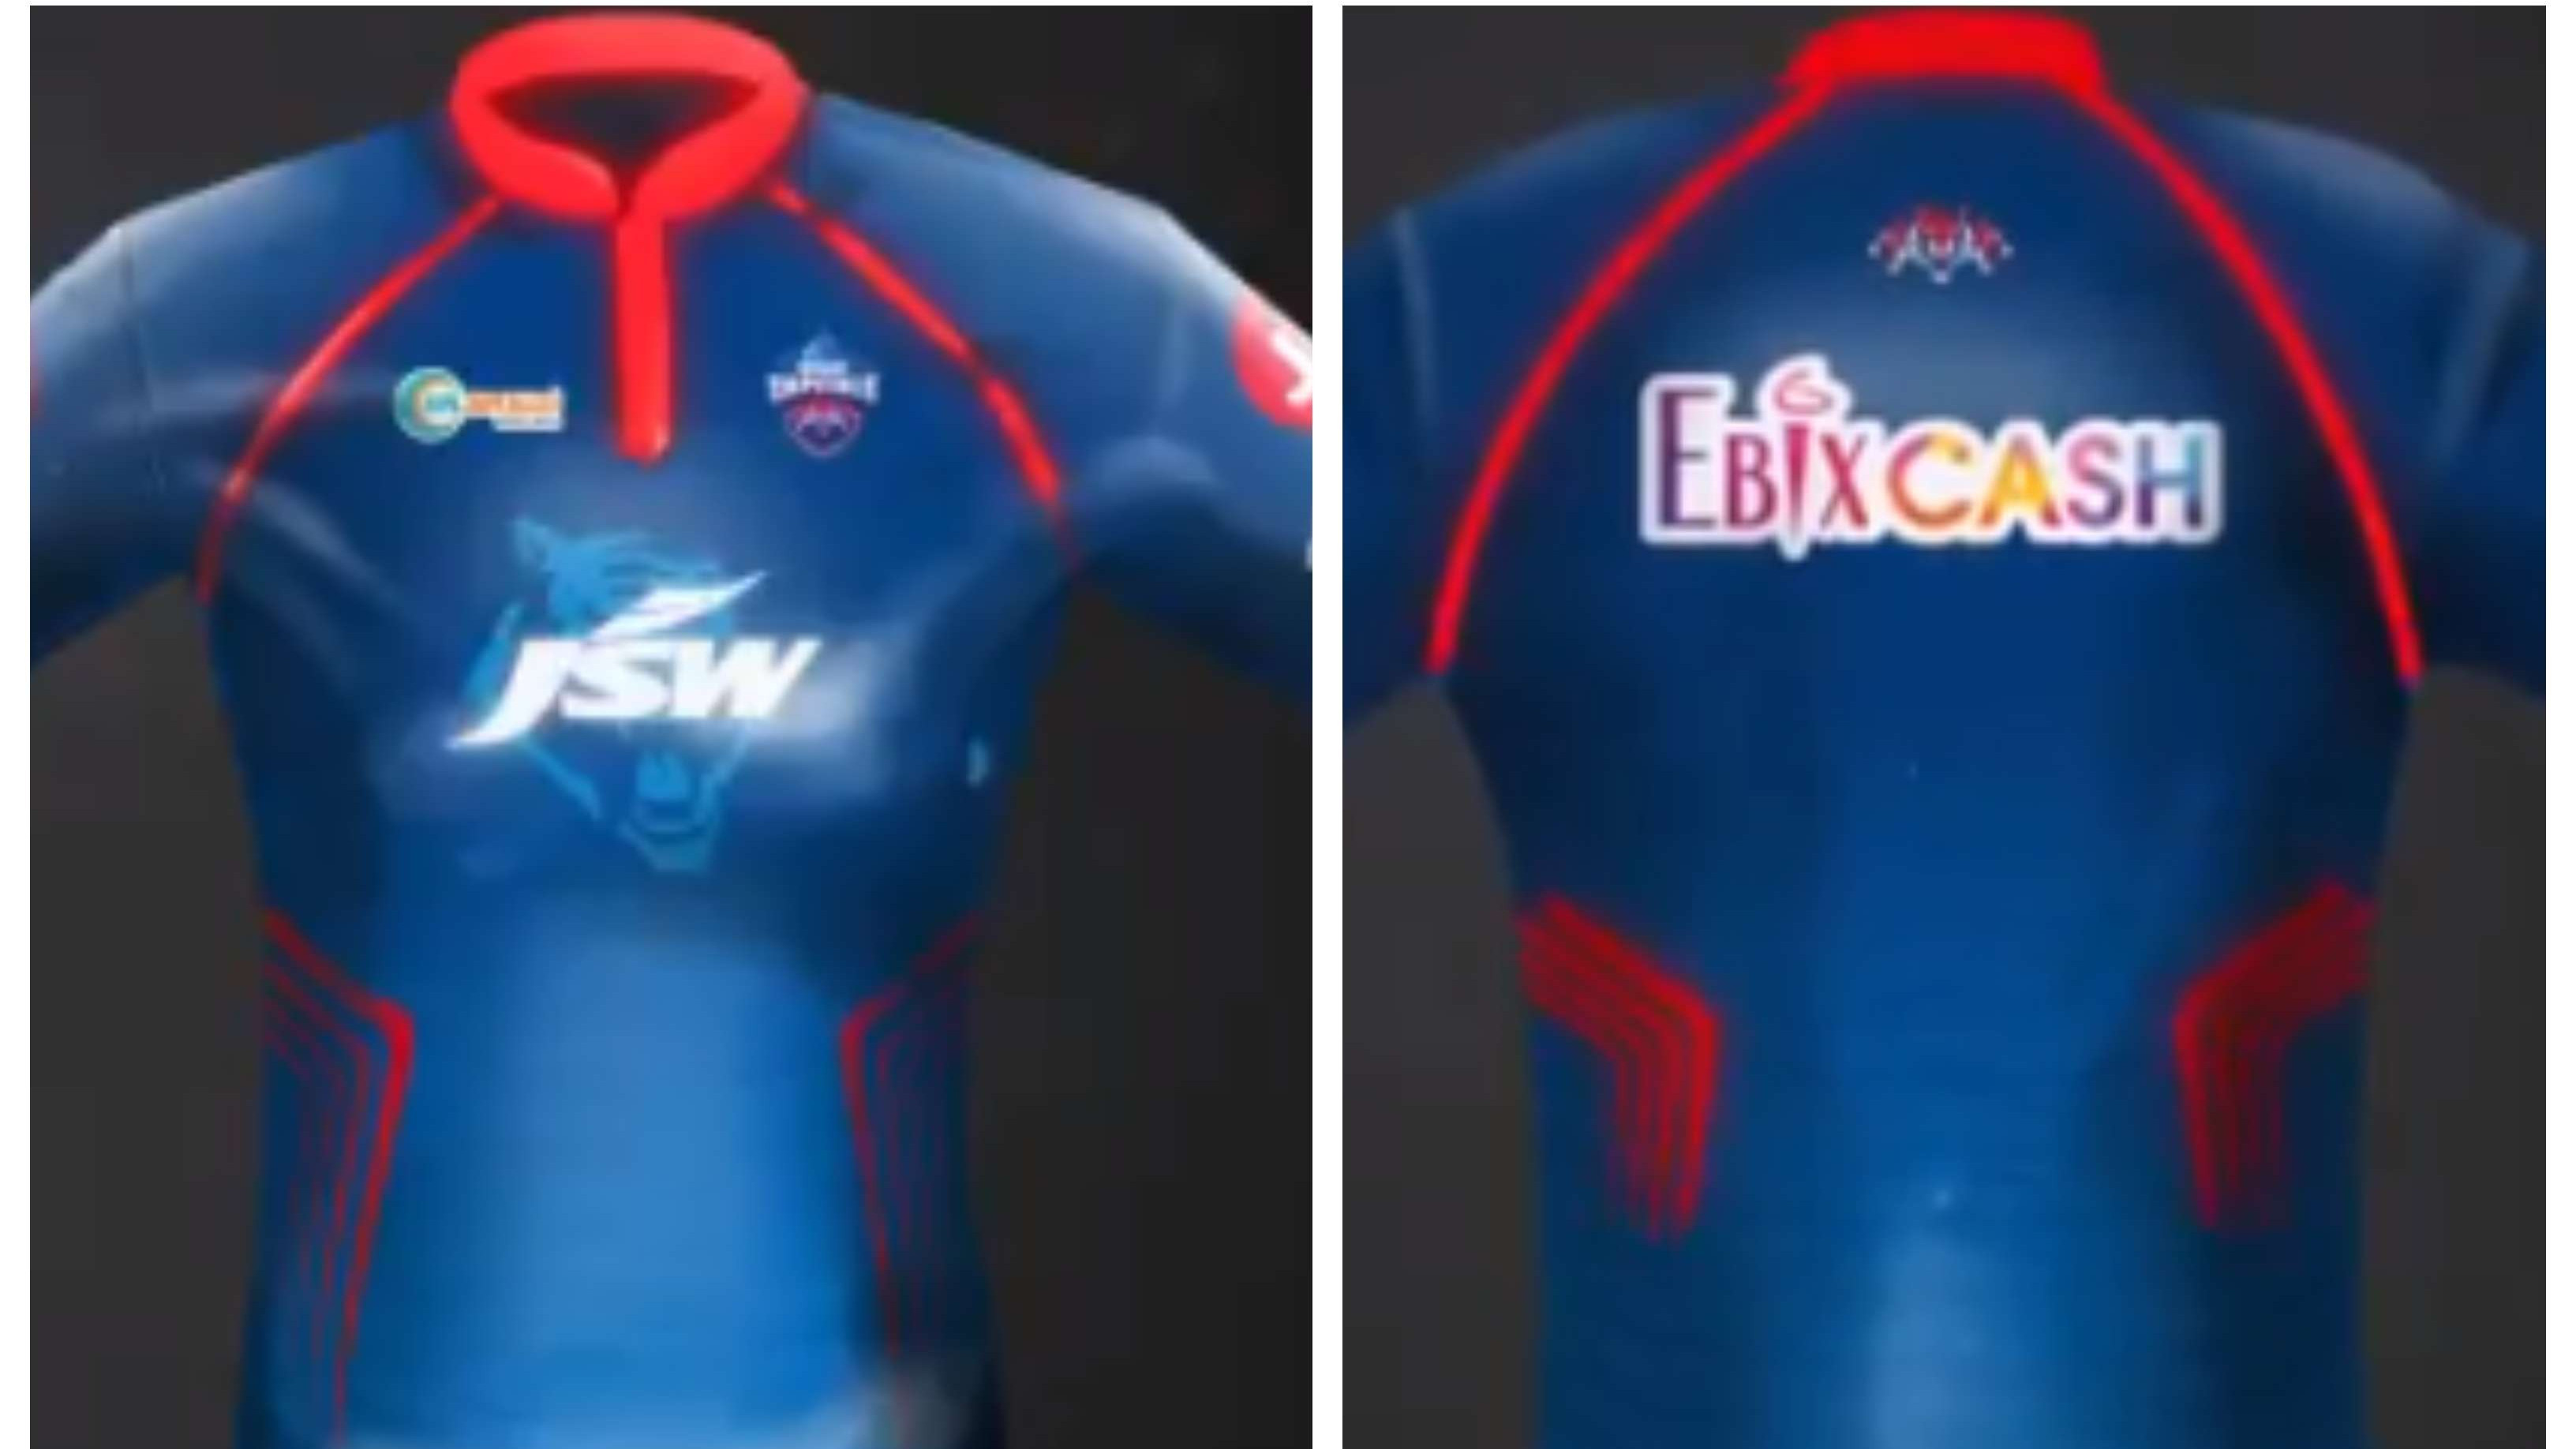 IPL 2021: Delhi Capitals unveil their new jersey for upcoming IPL